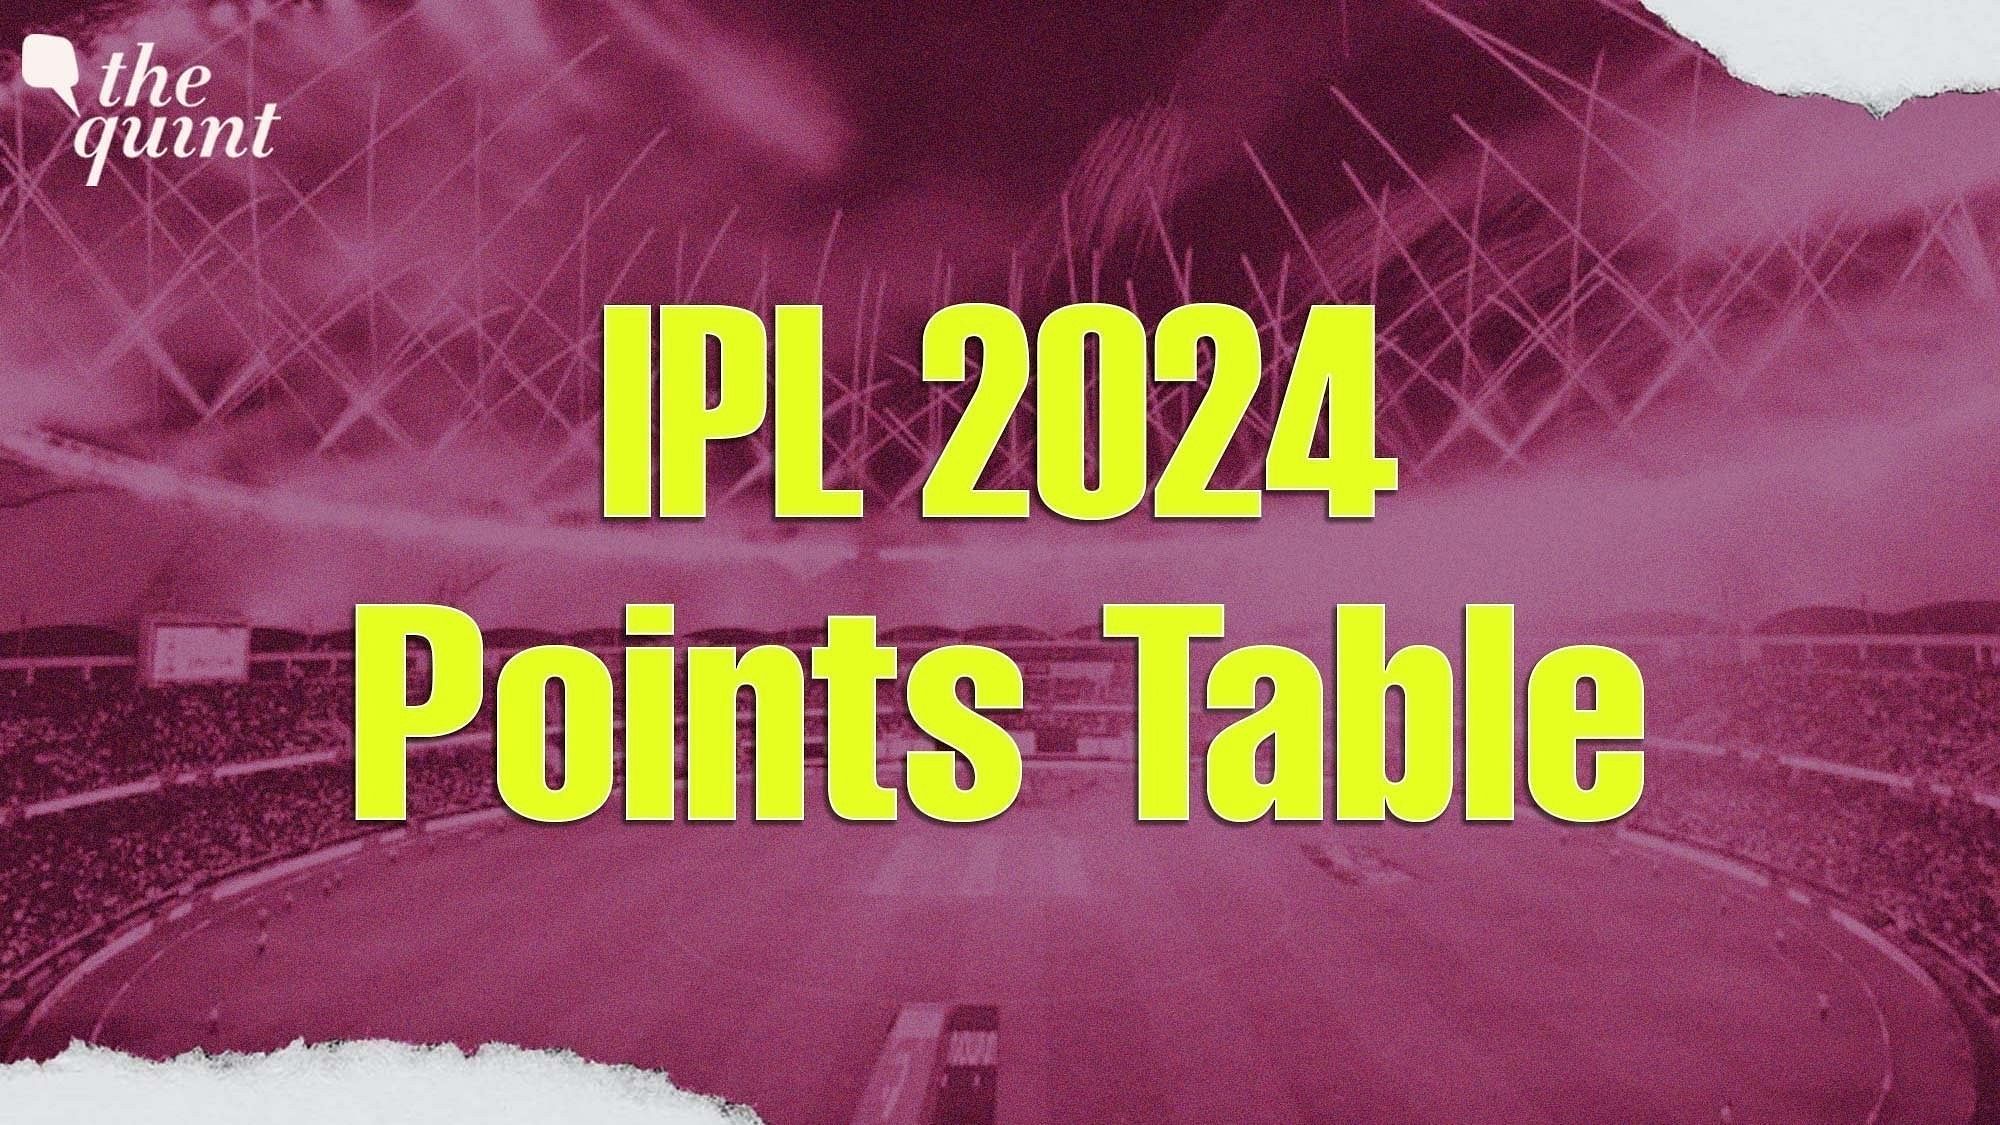 <div class="paragraphs"><p>IPL 2024 Points Table: Total points of all teams after the GT vs DC match on Wednesday.</p></div>